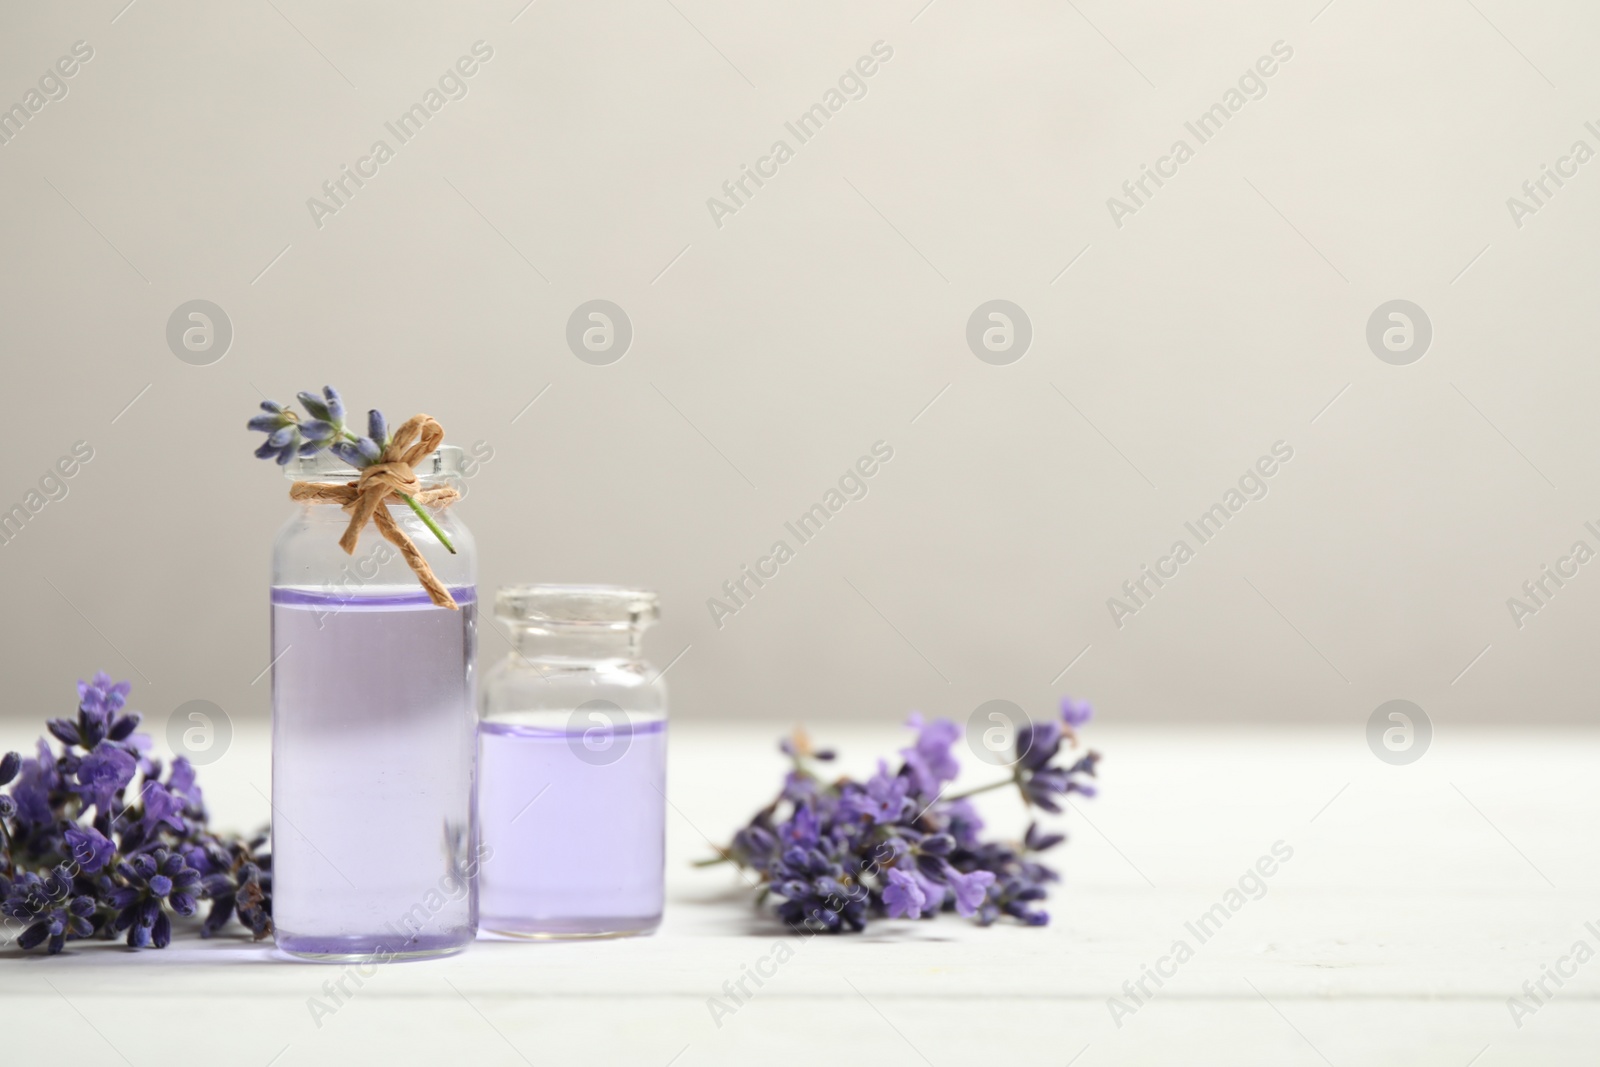 Photo of Bottles of essential oil and lavender flowers on white wooden table. Space for text